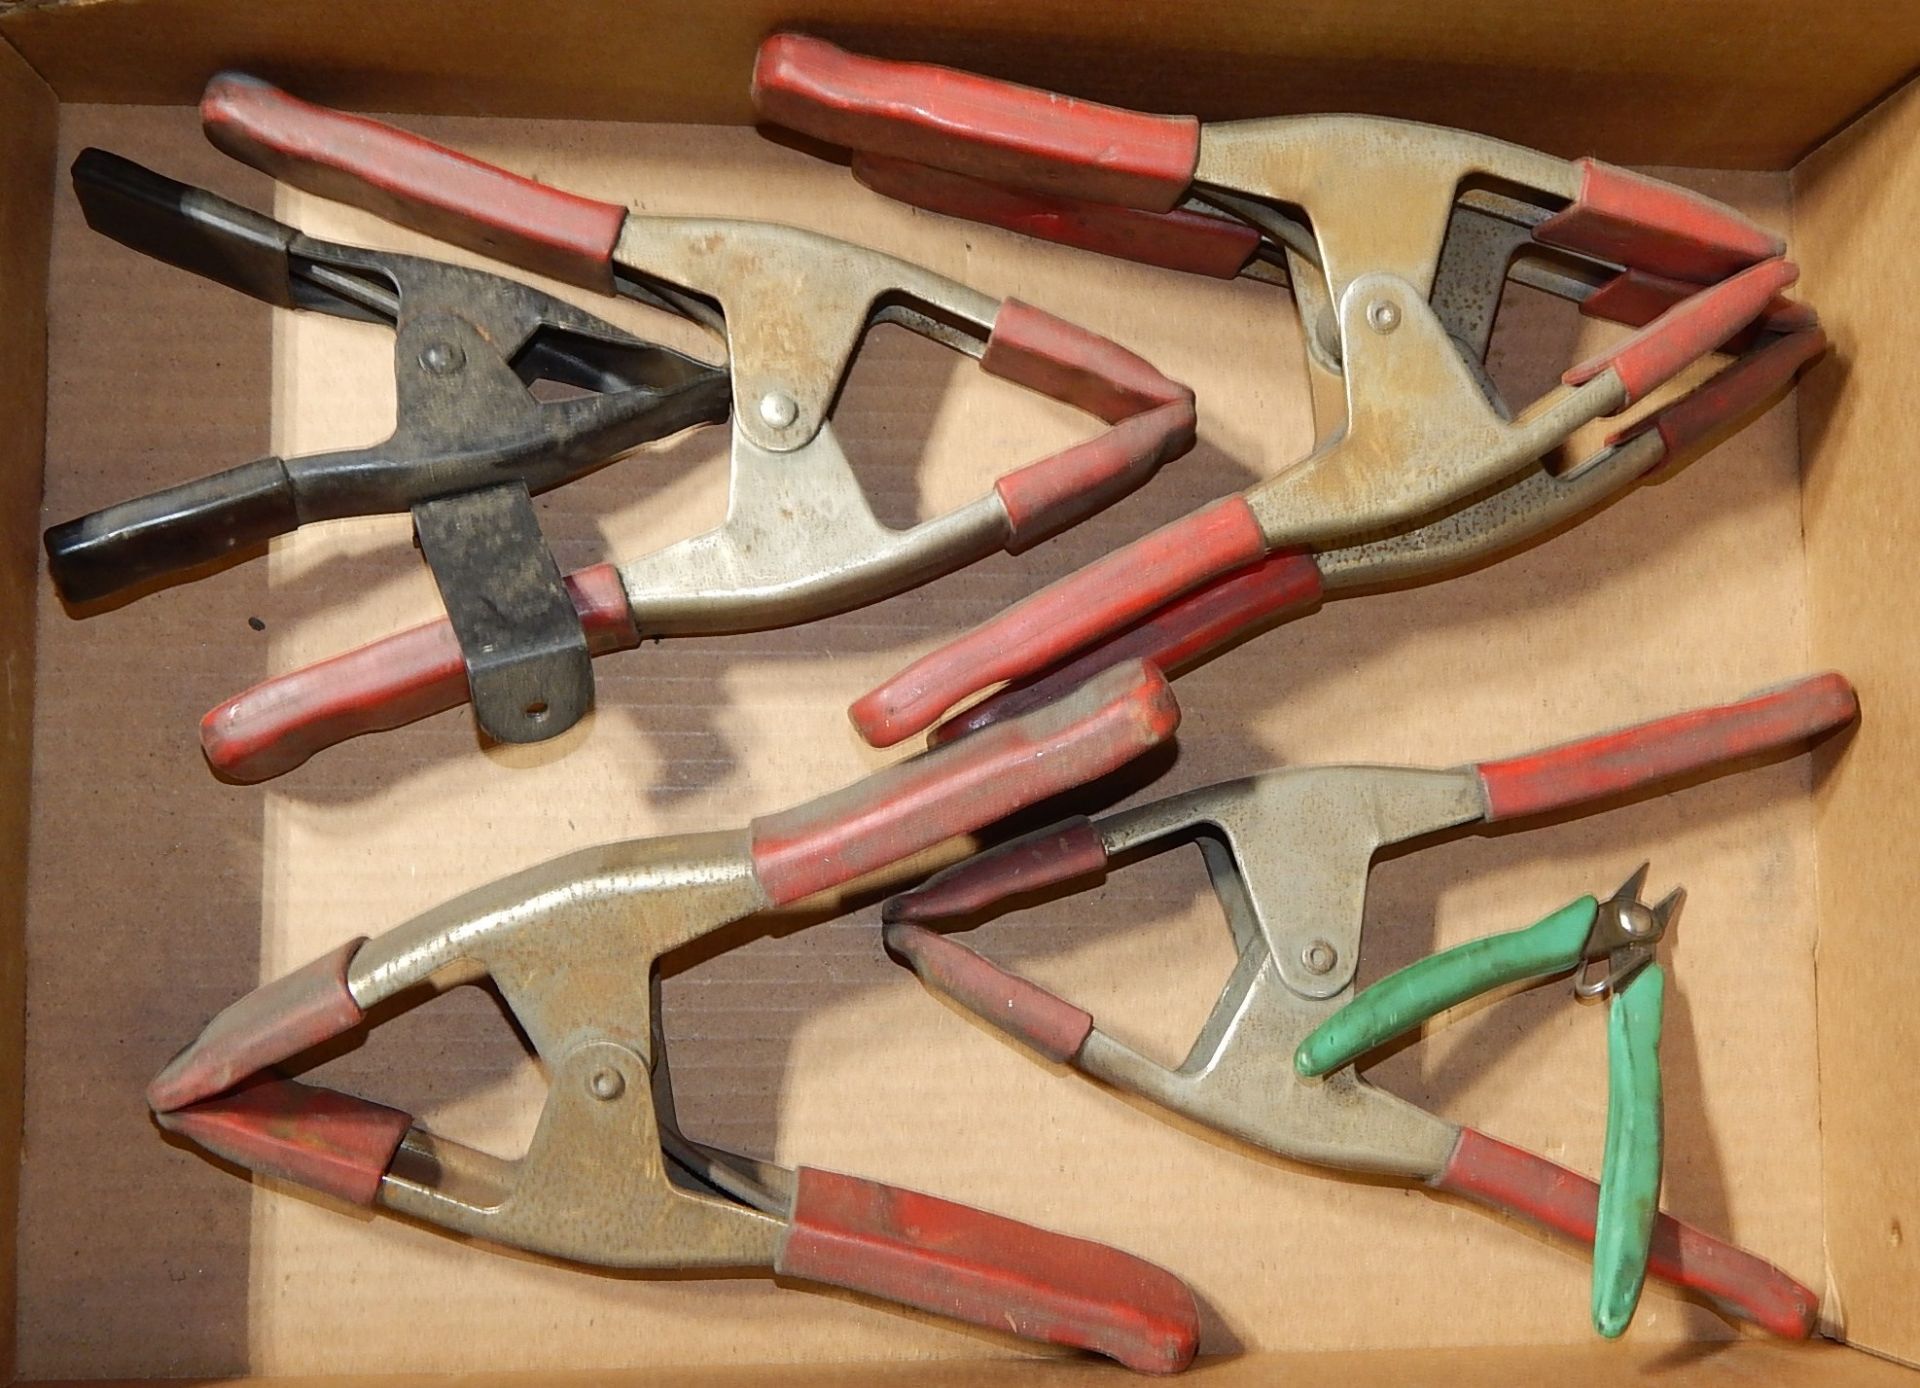 Spring Clamps